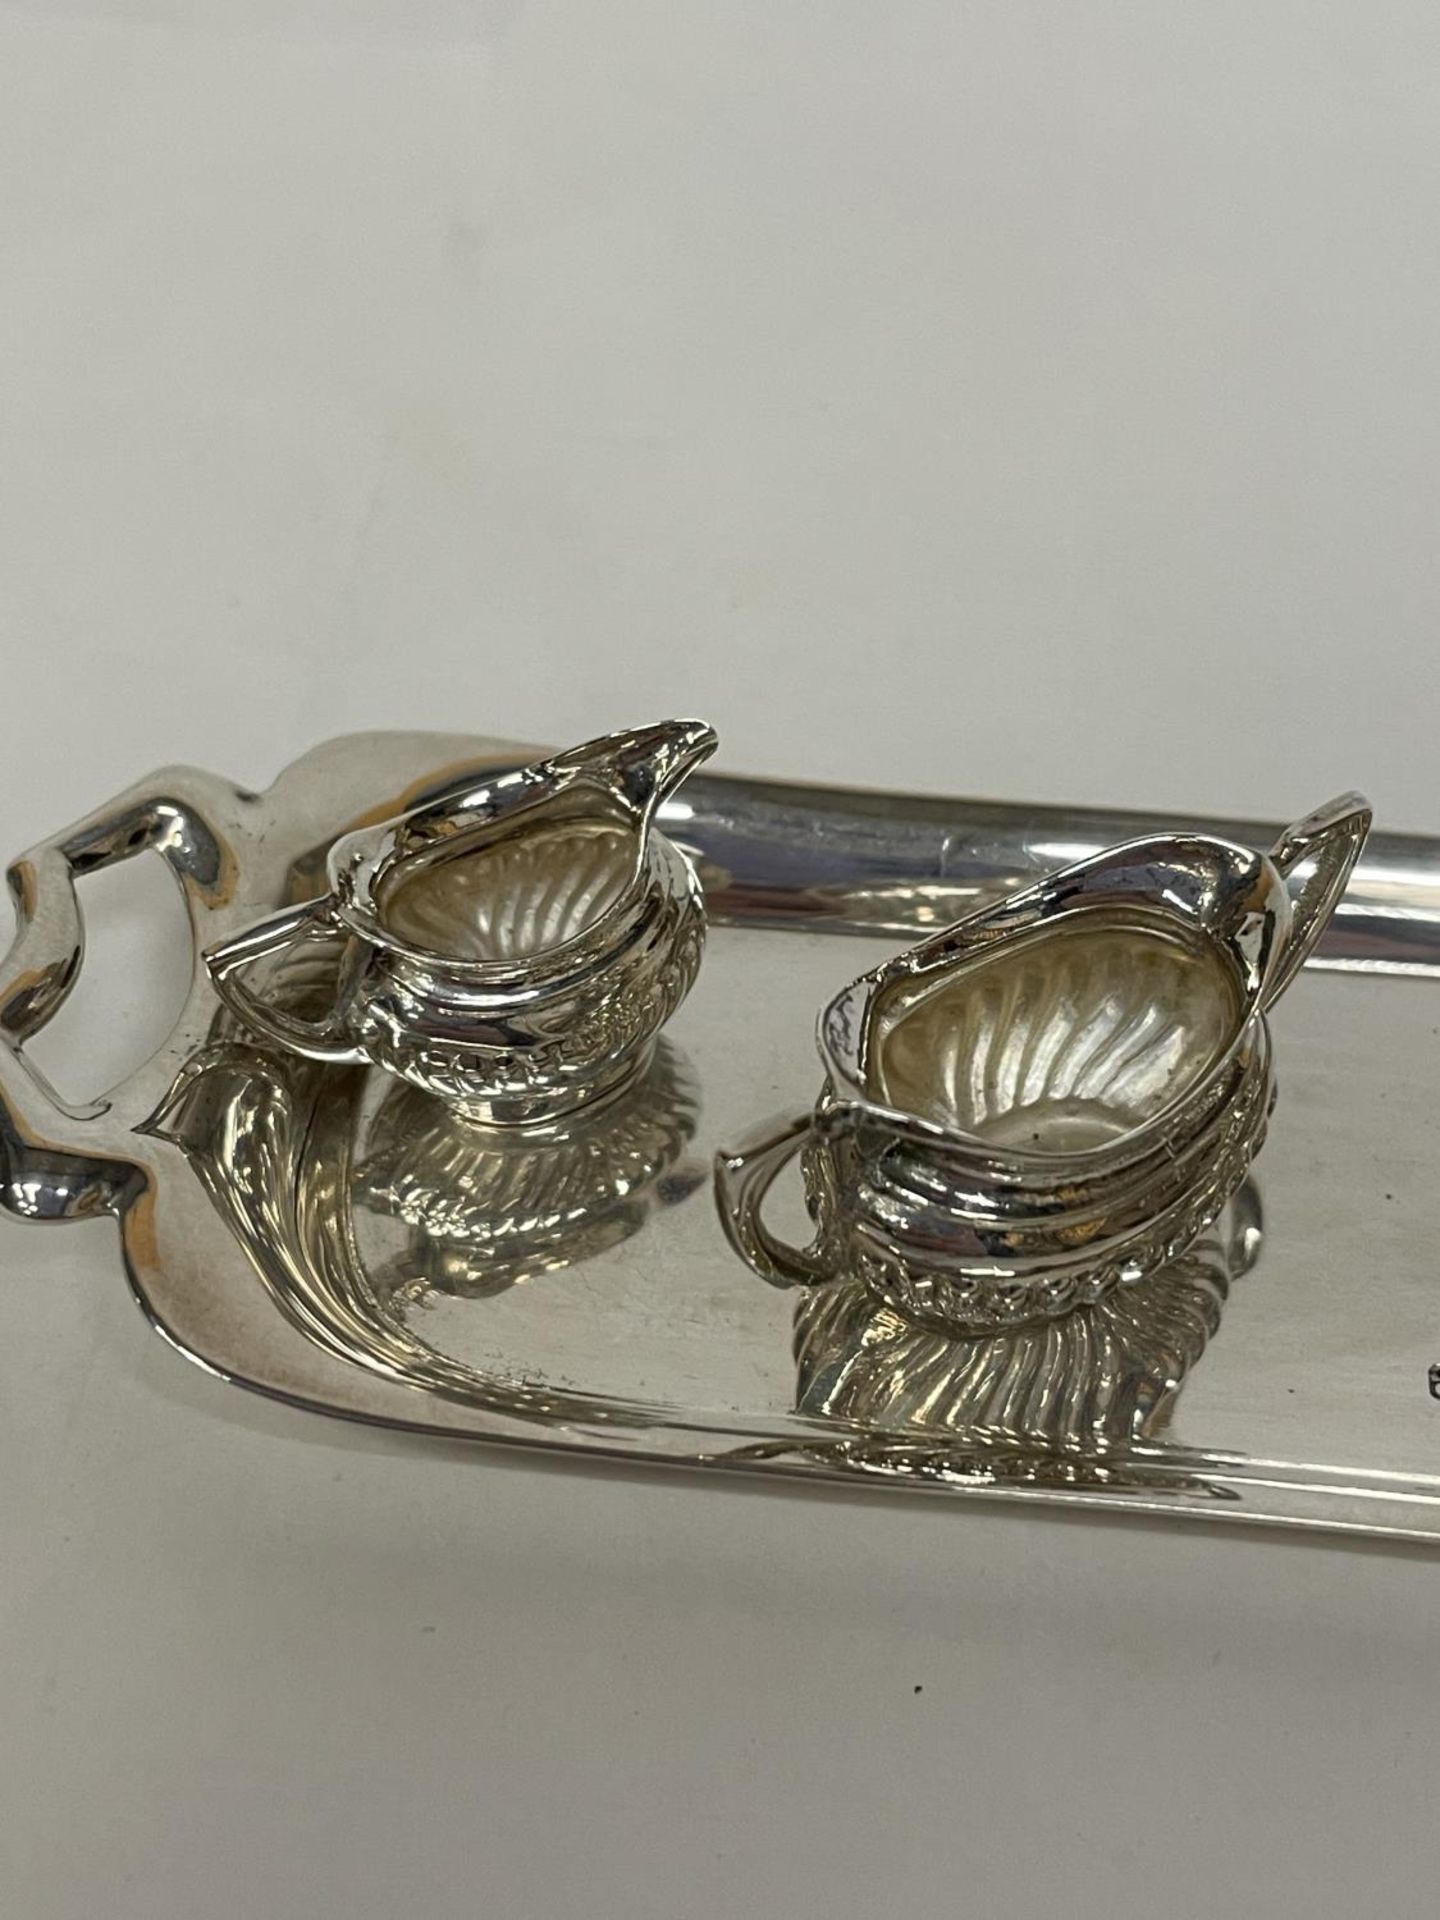 A MINATURE HALLMARKED BIRMINGHAM SILVER TEASET ON A TRAY - Image 3 of 4